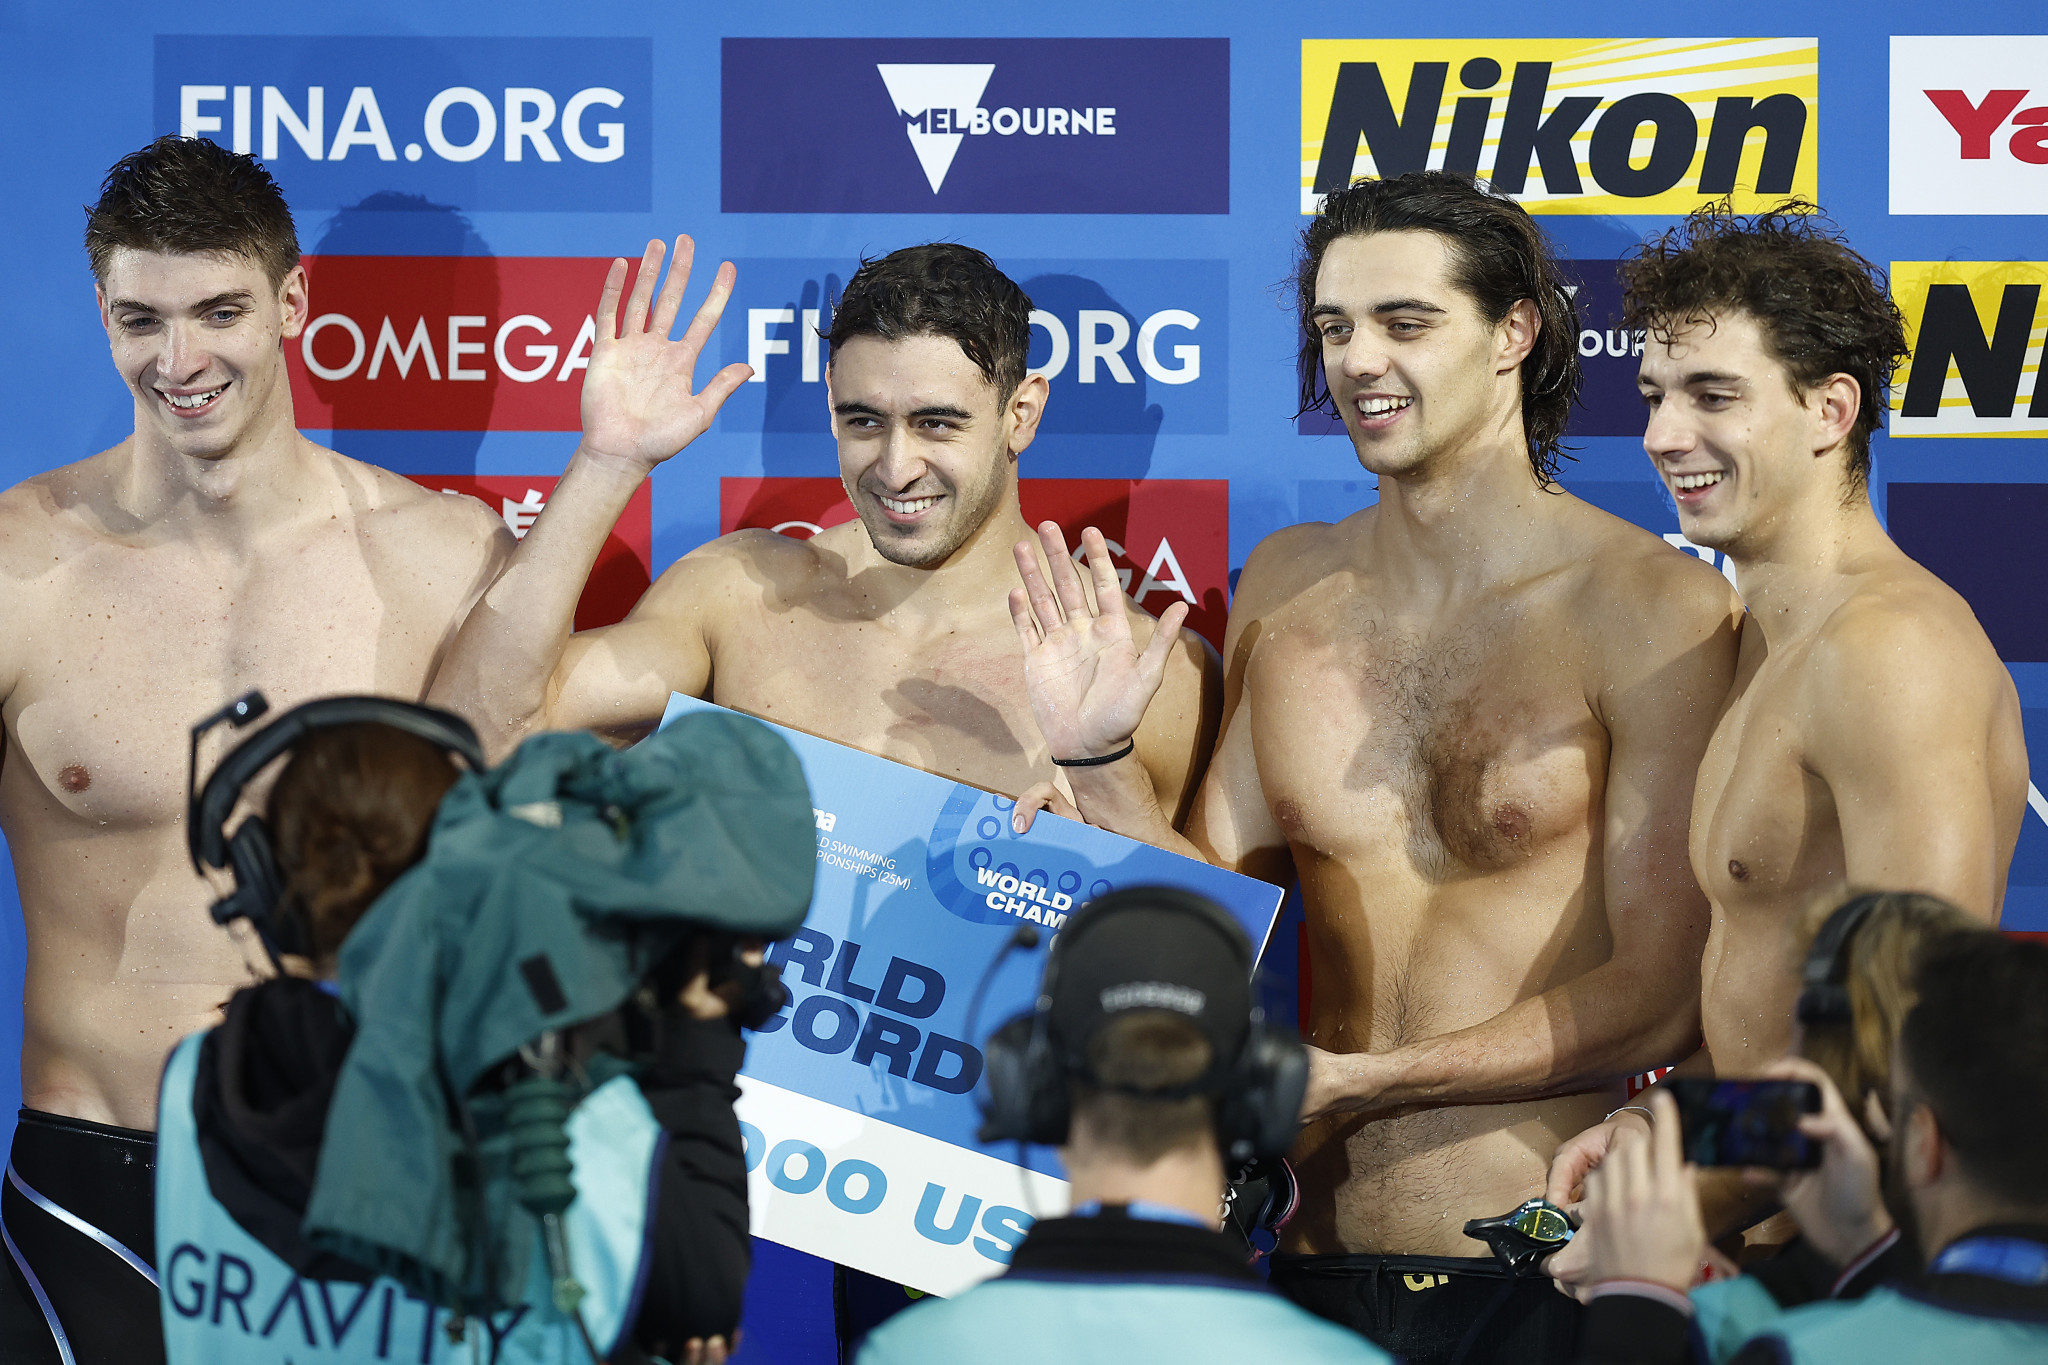 Italy broke the men's 4x100m freestyle relay world record in the final race of the opening day in Melbourne ©Getty Images